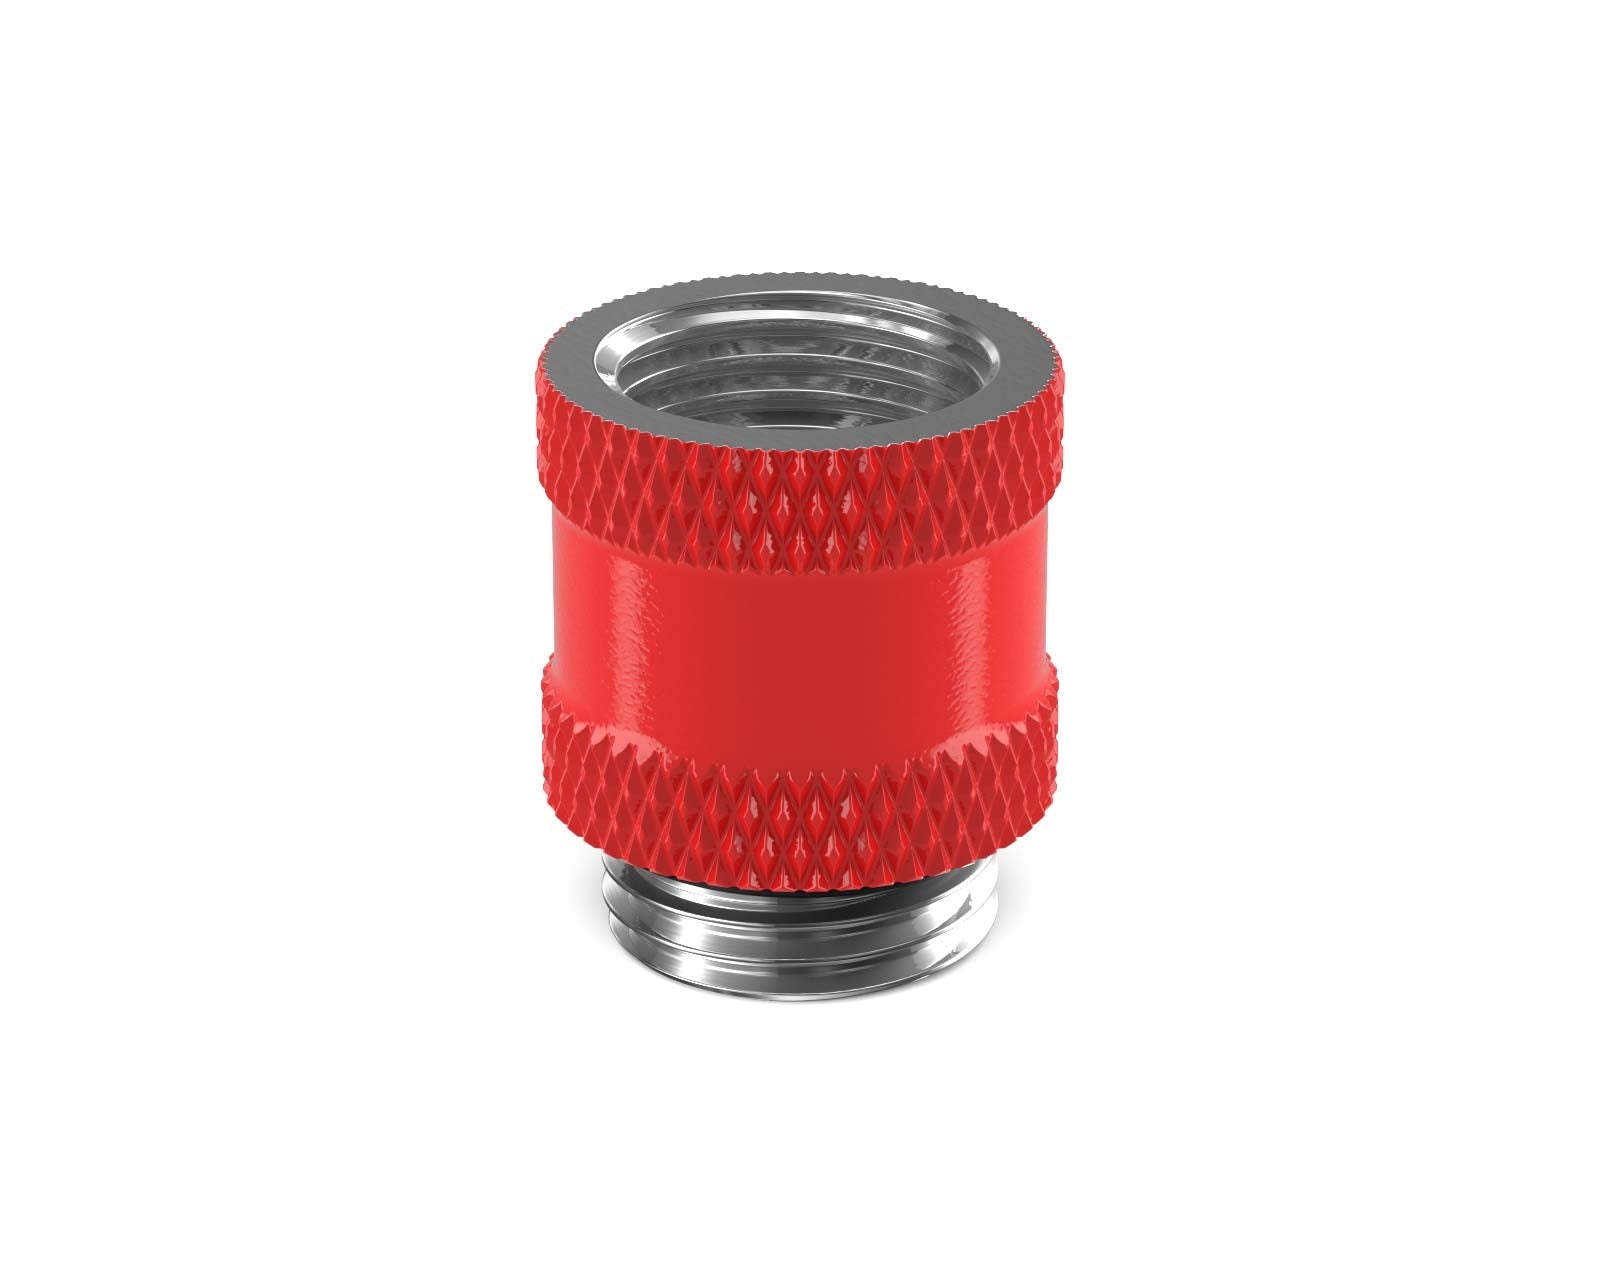 PrimoChill Male to Female G 1/4in. 15mm SX Extension Coupler - Razor Red